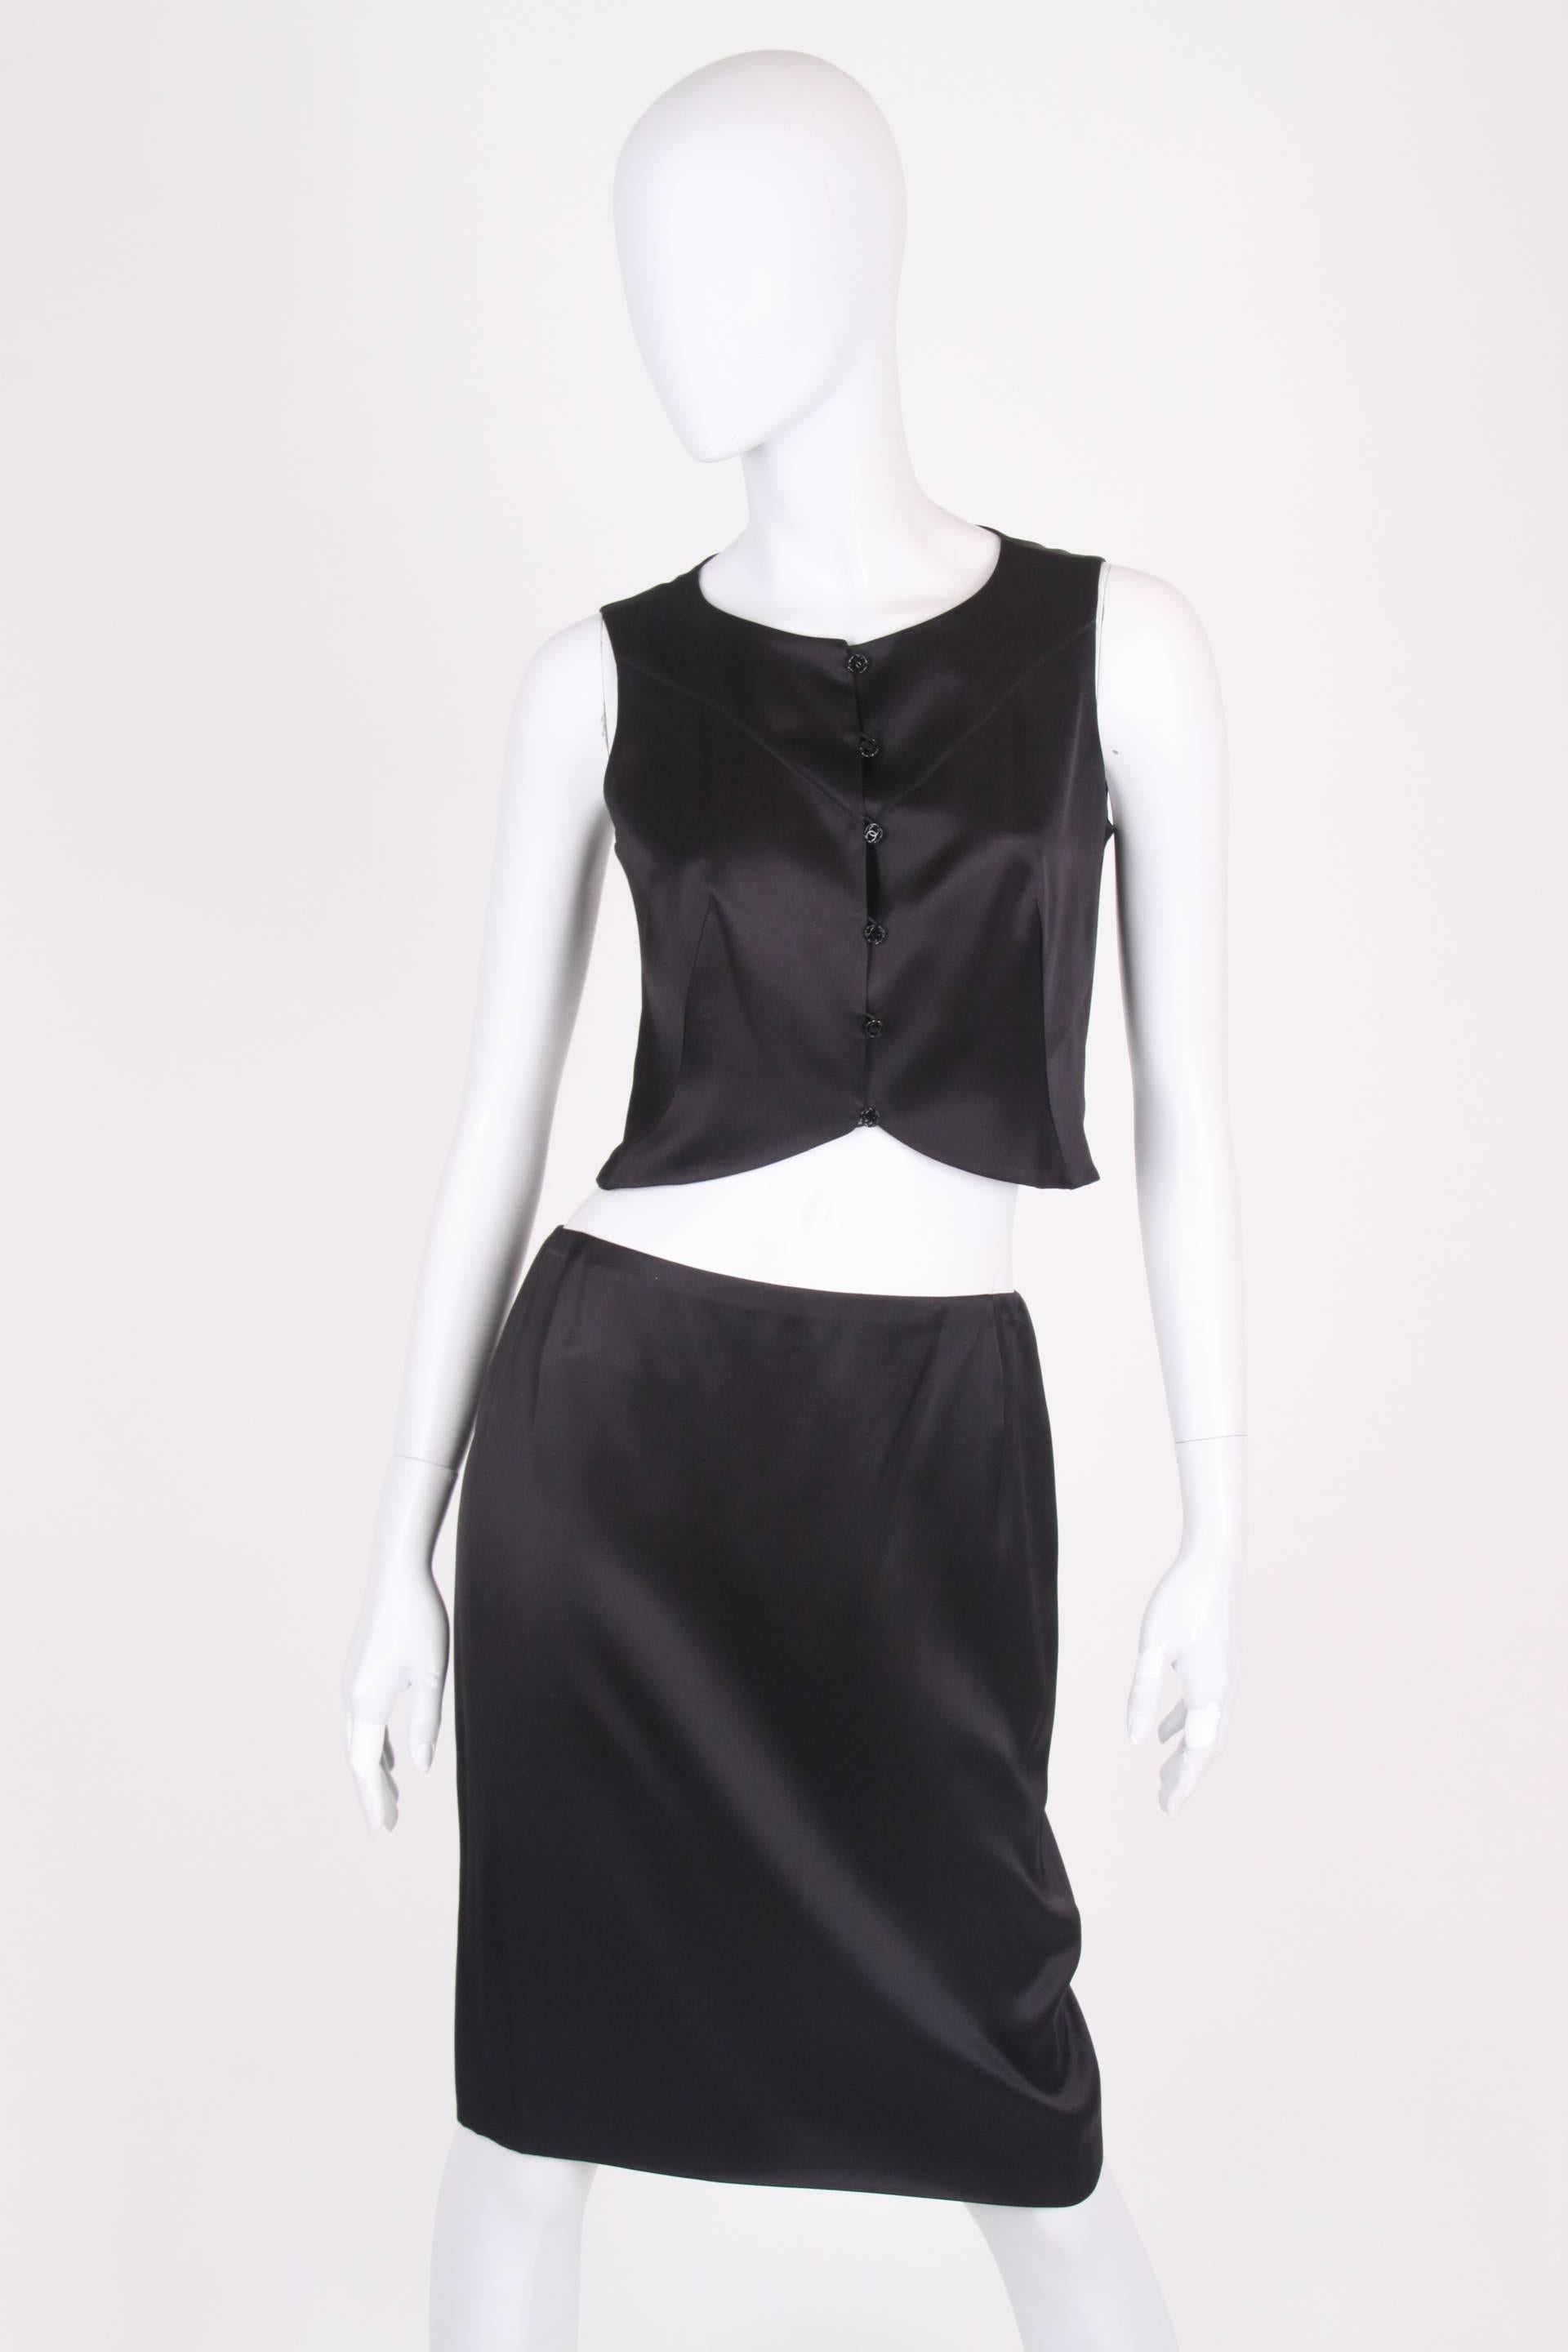 Chanel 2-pcs Silk Suit Top & Skirt - black In Excellent Condition For Sale In Baarn, NL